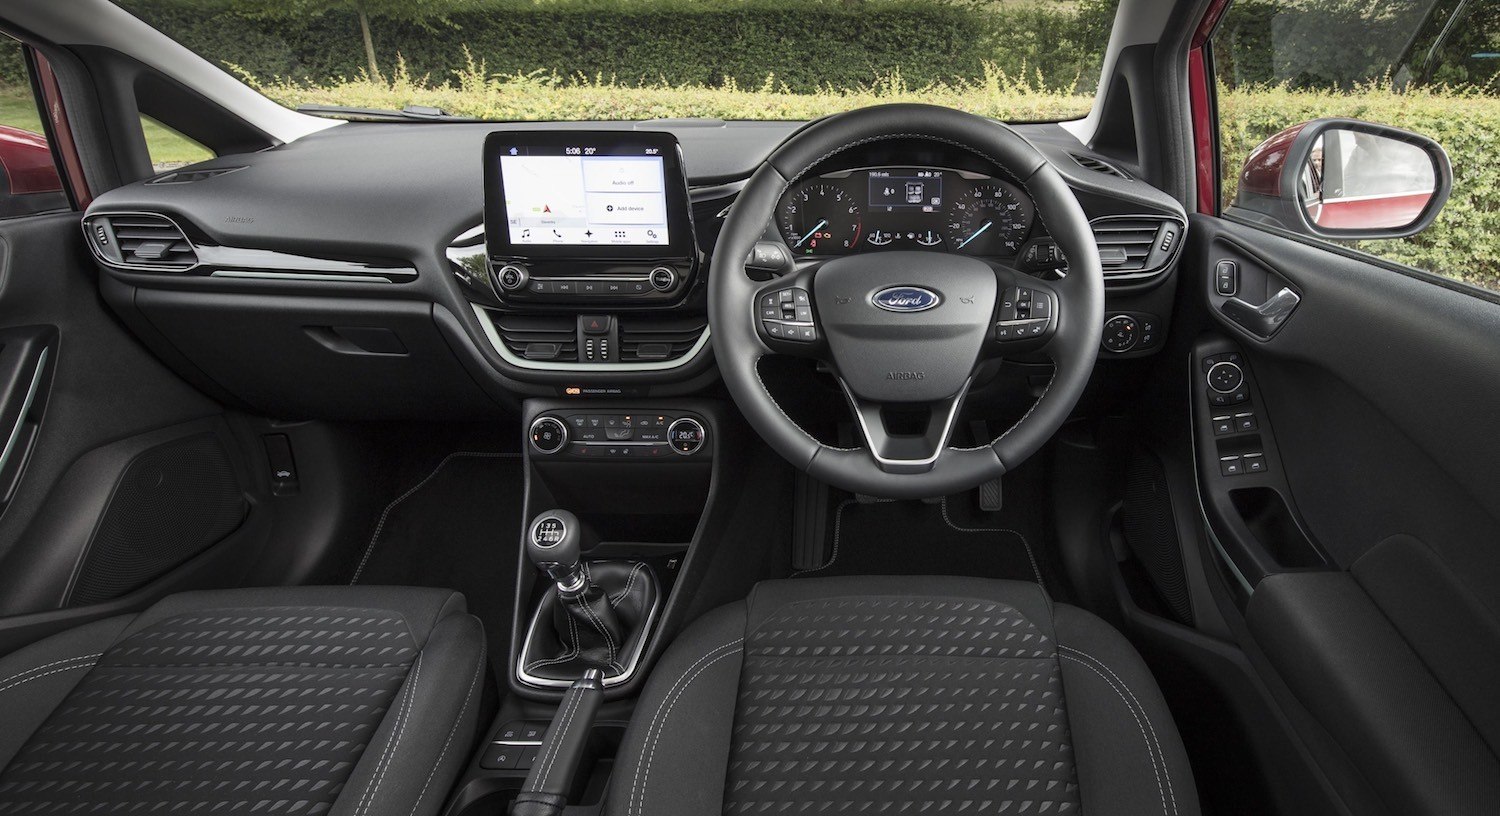 Tom Scanlan reviews the All New Ford Fiesta for Drive 6